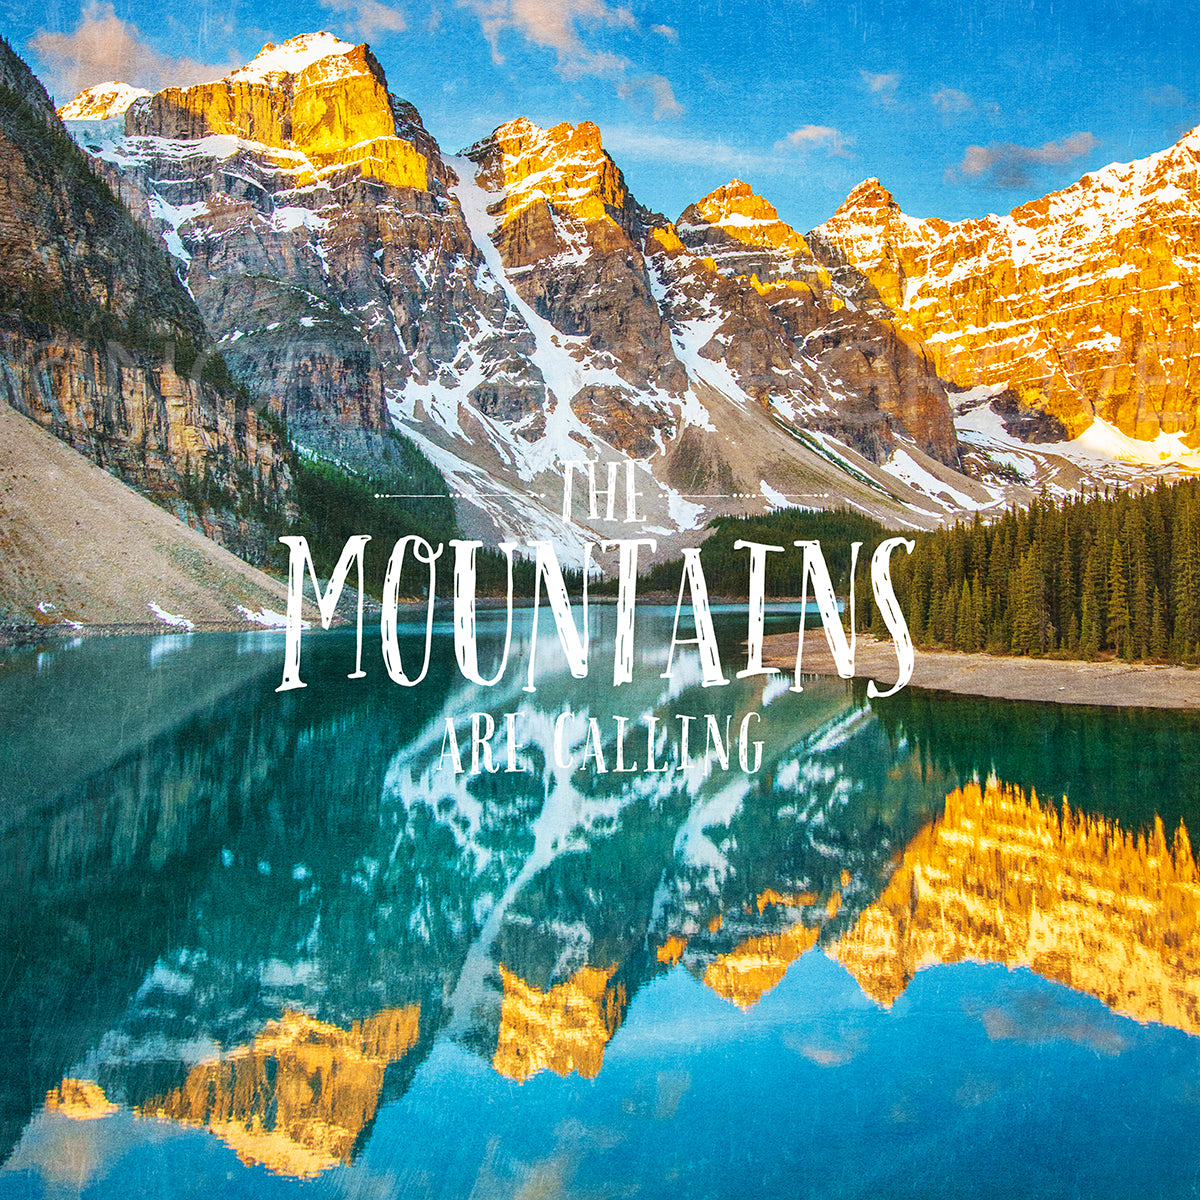 SALE 12x12" Metallic Paper Print <br>The Mountains Are Calling Moraine Lake<br>